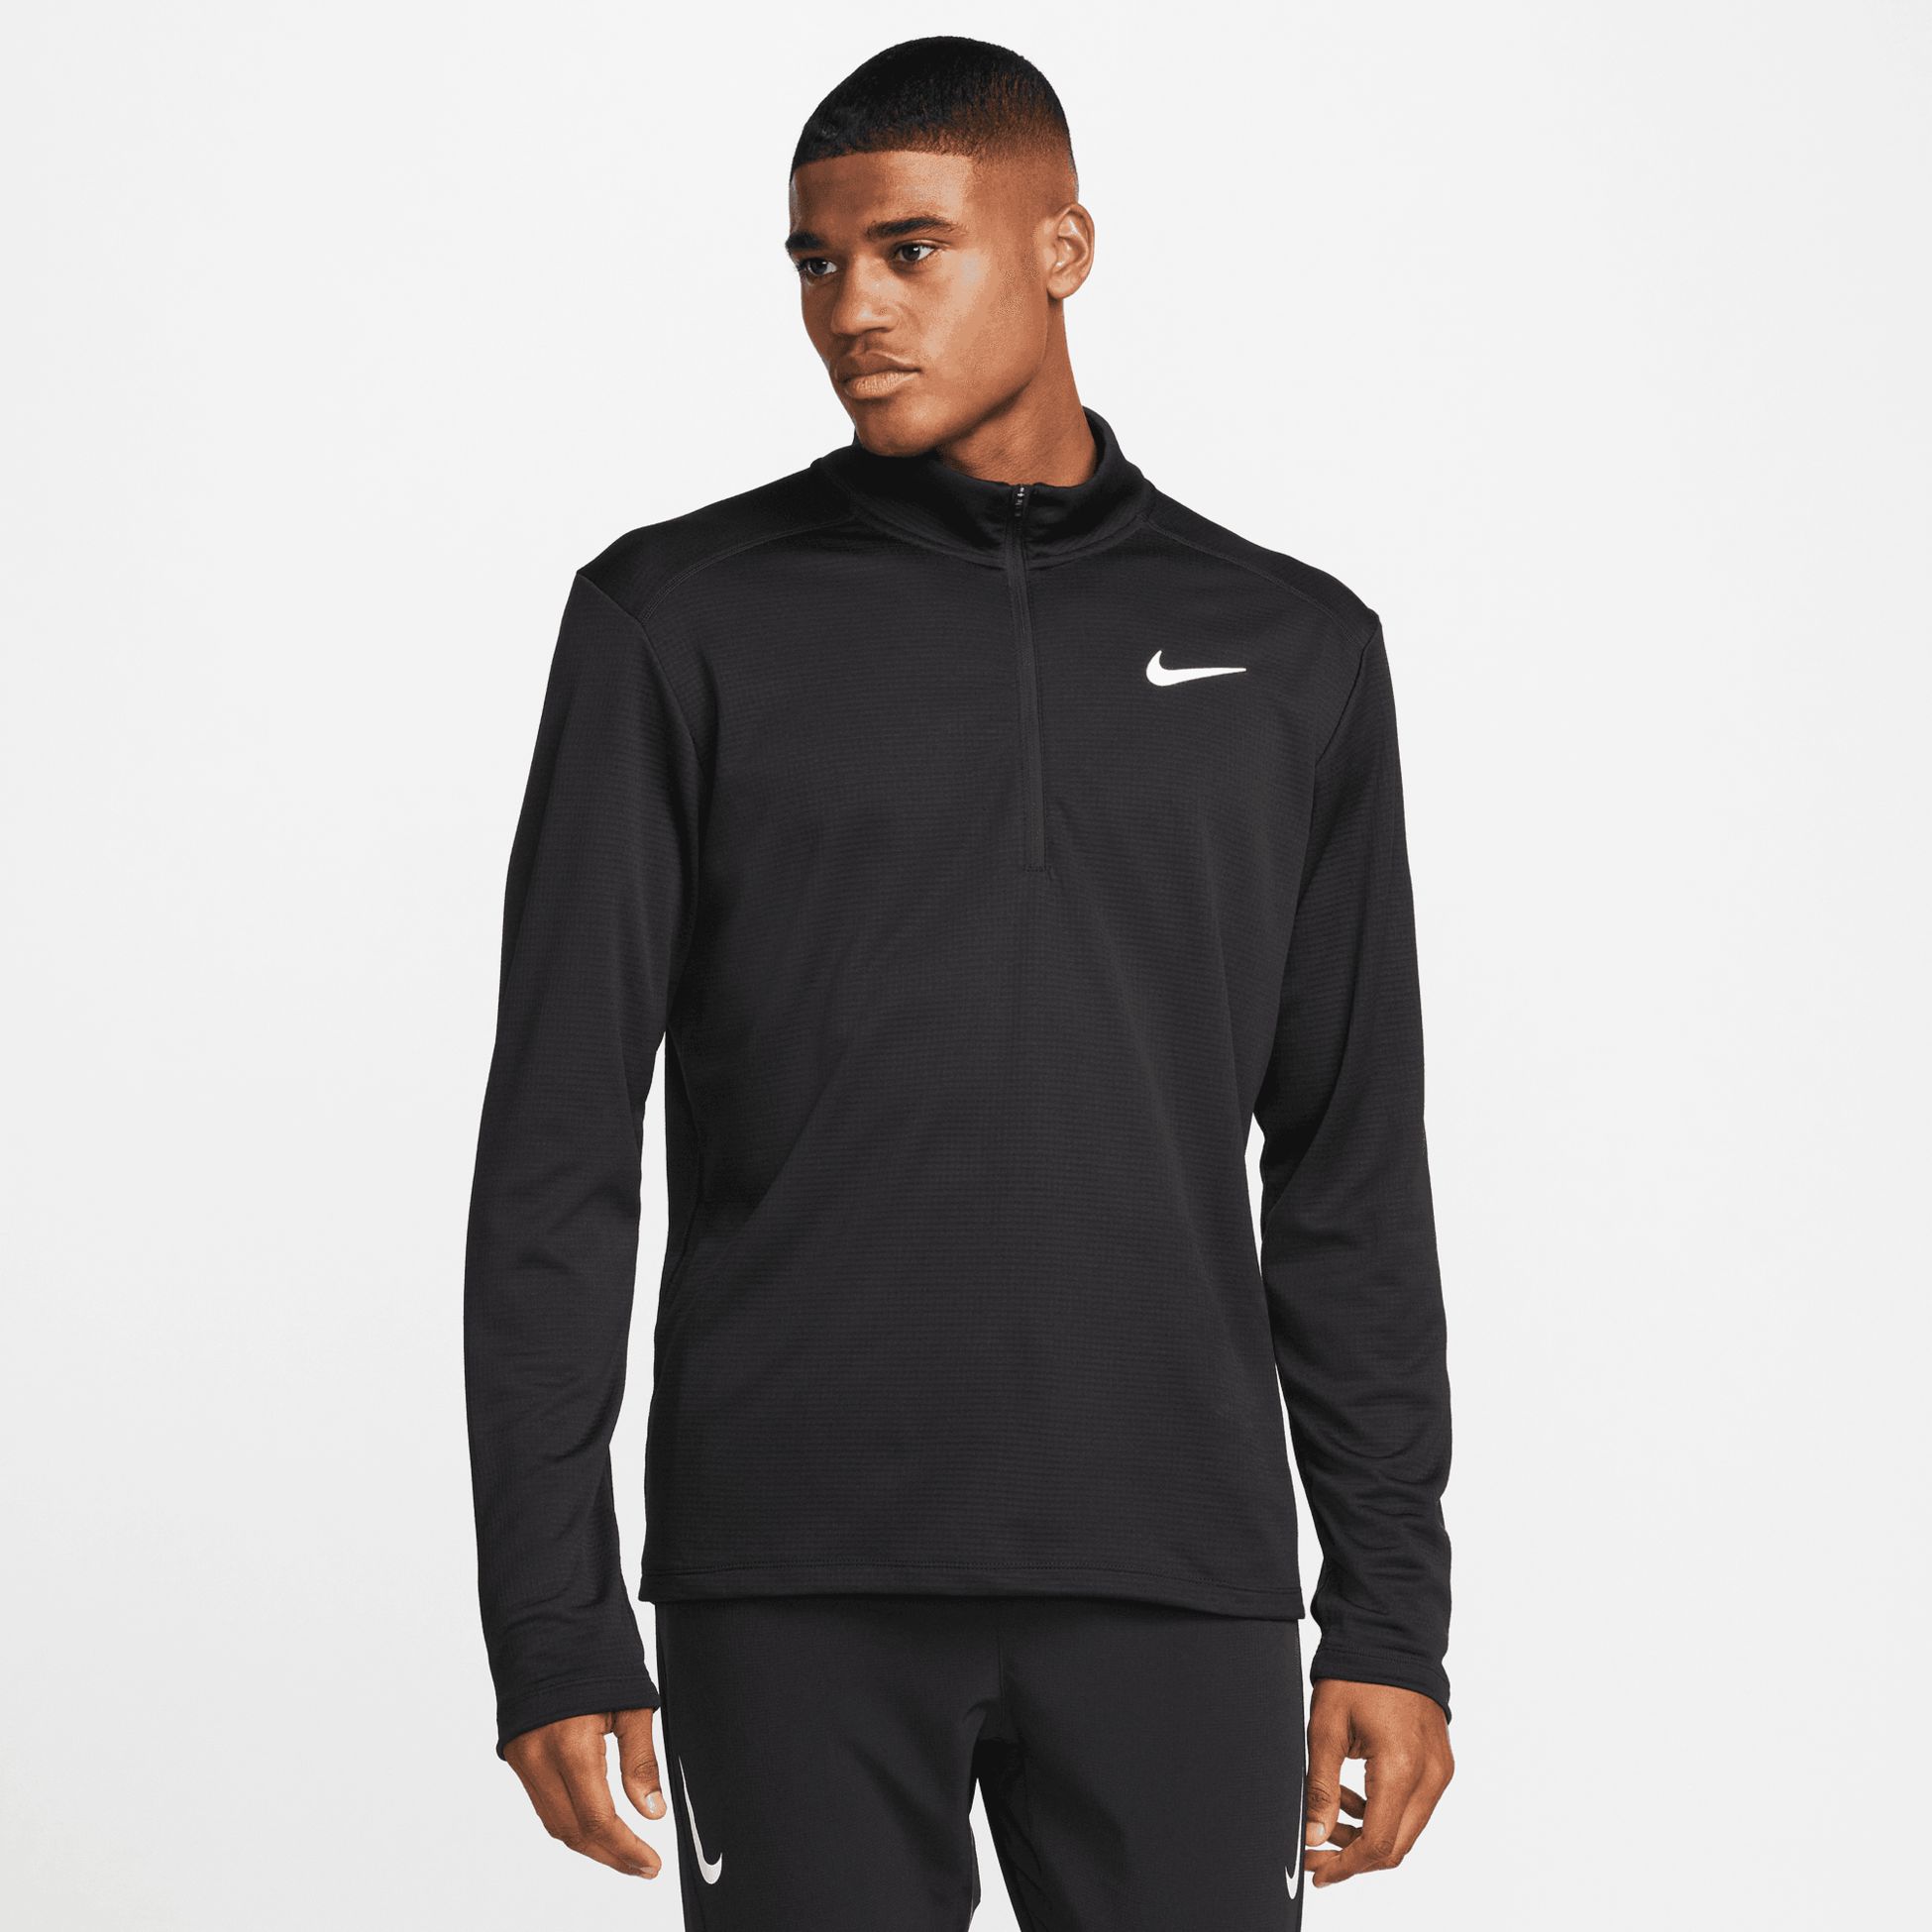 NIKE, M NK PACER TOP HZ